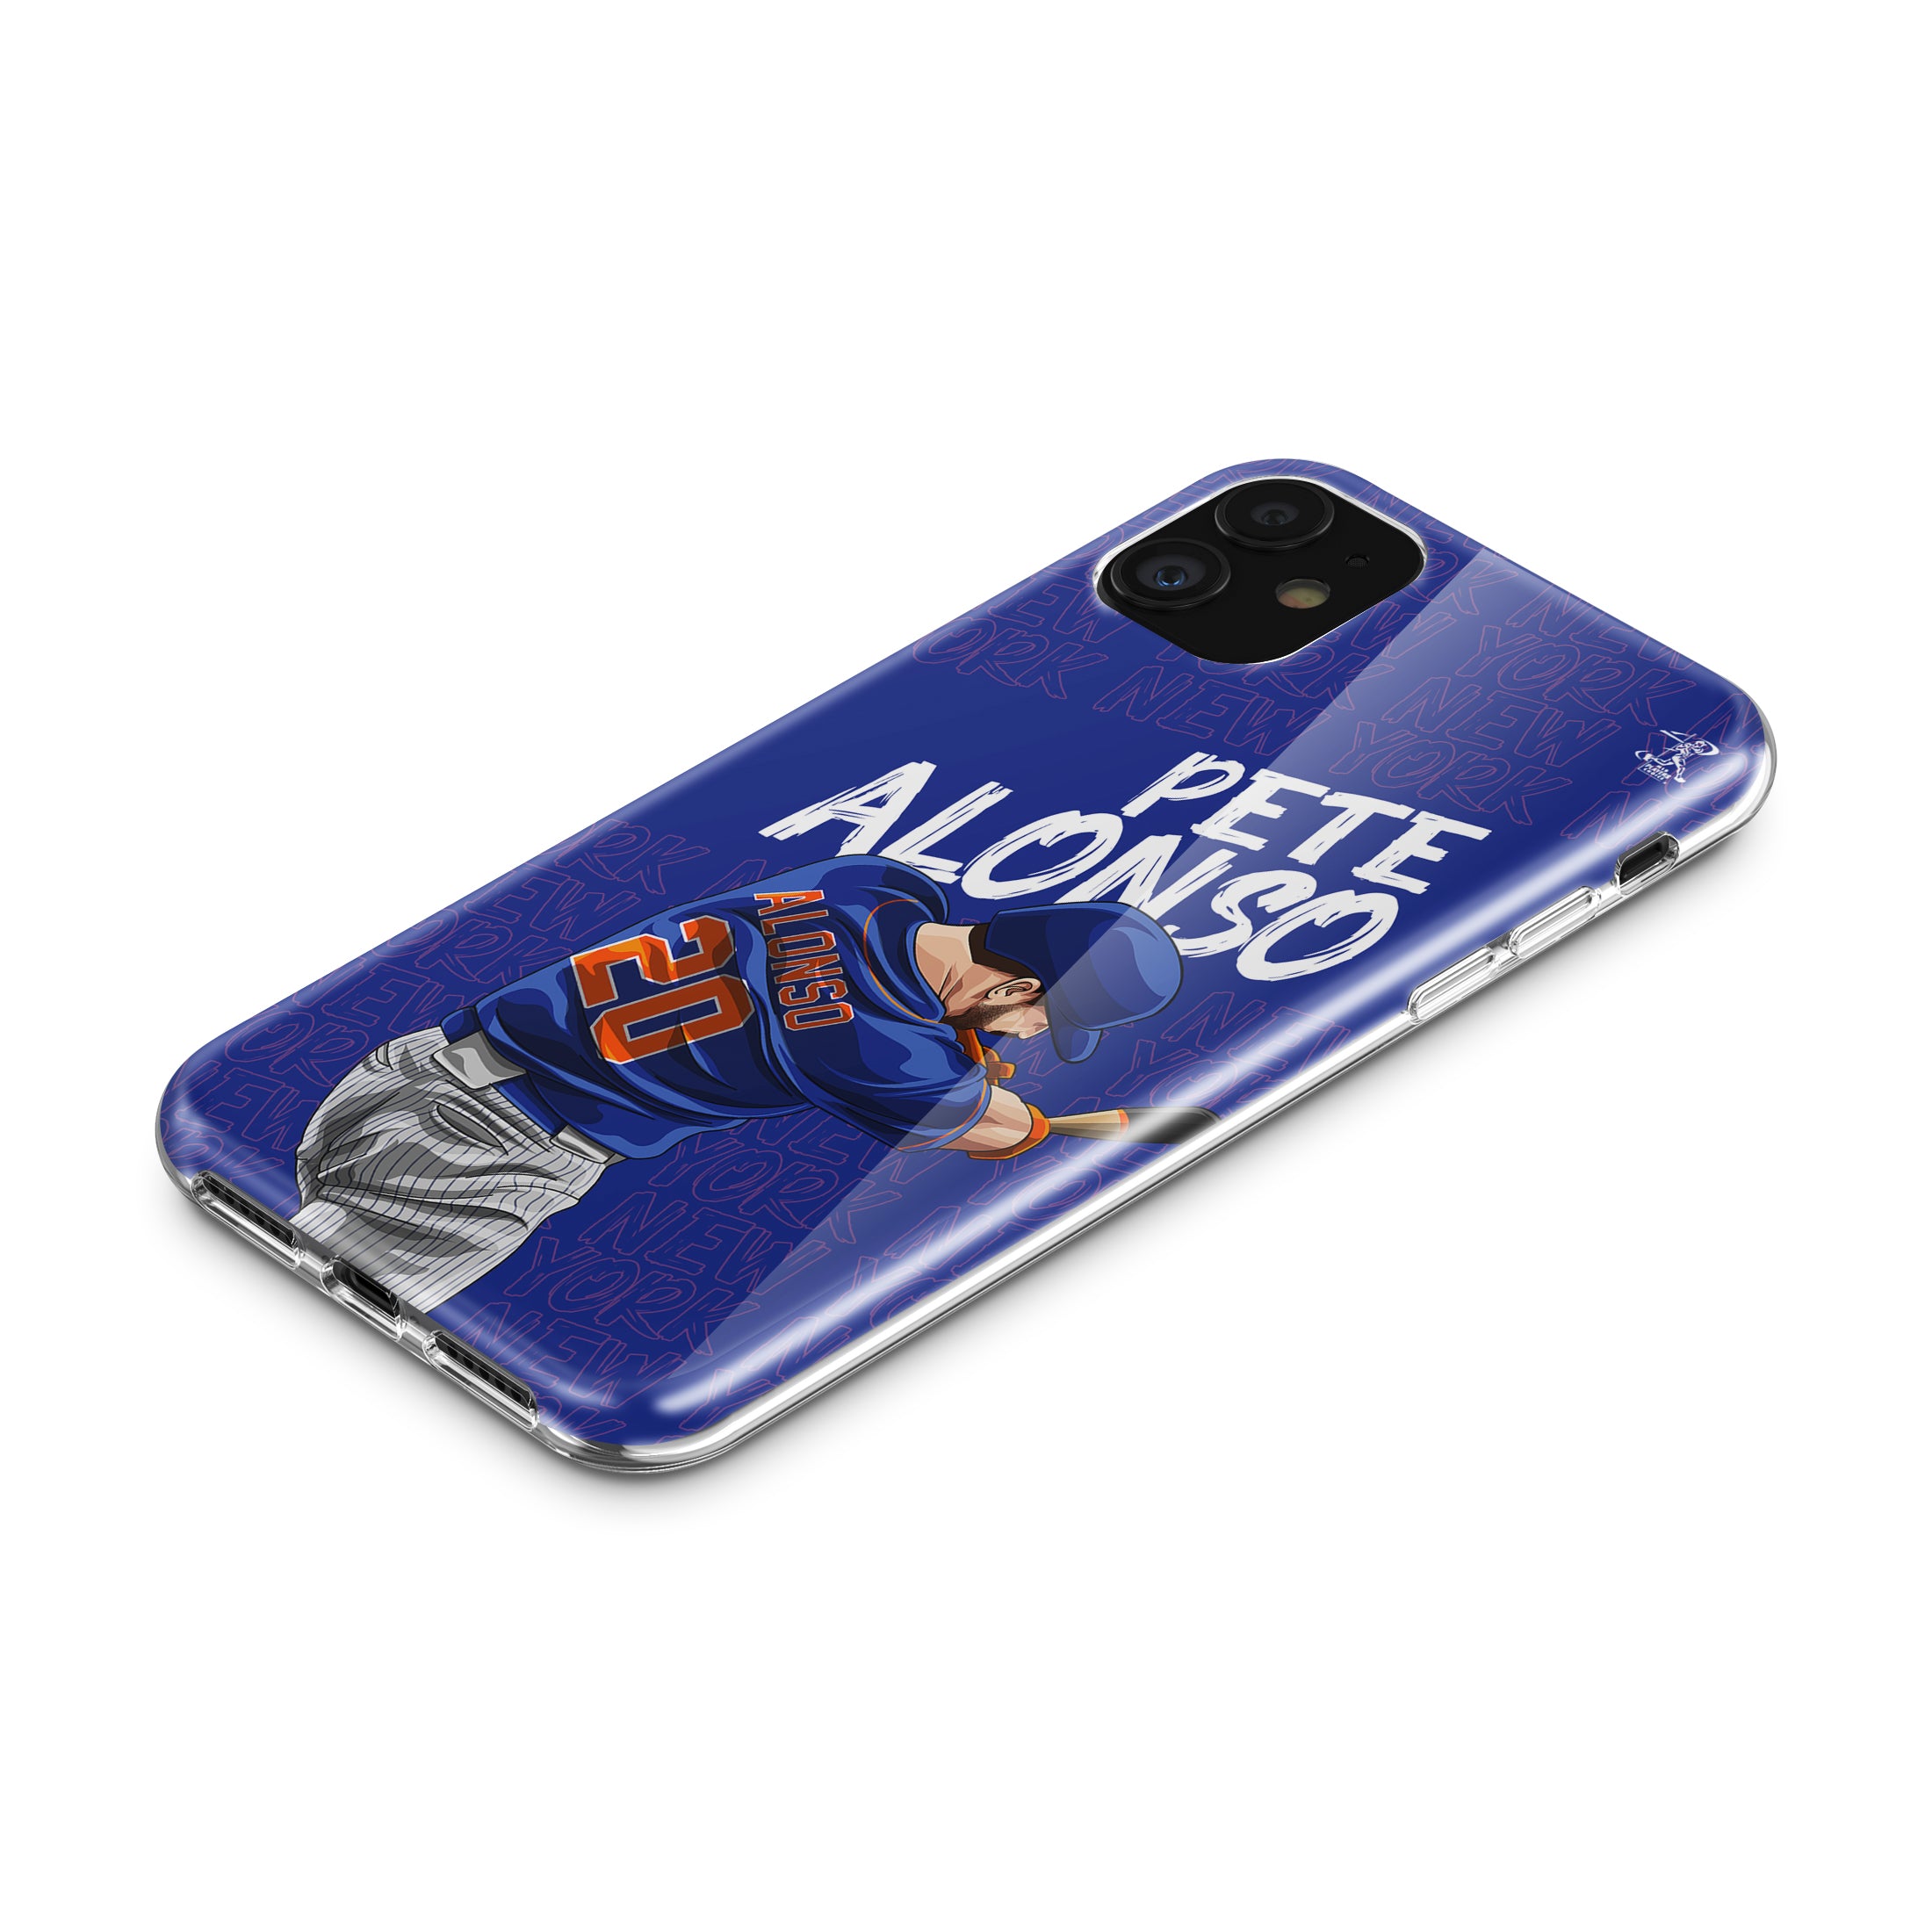 Alonso Star Series 2.0 Case